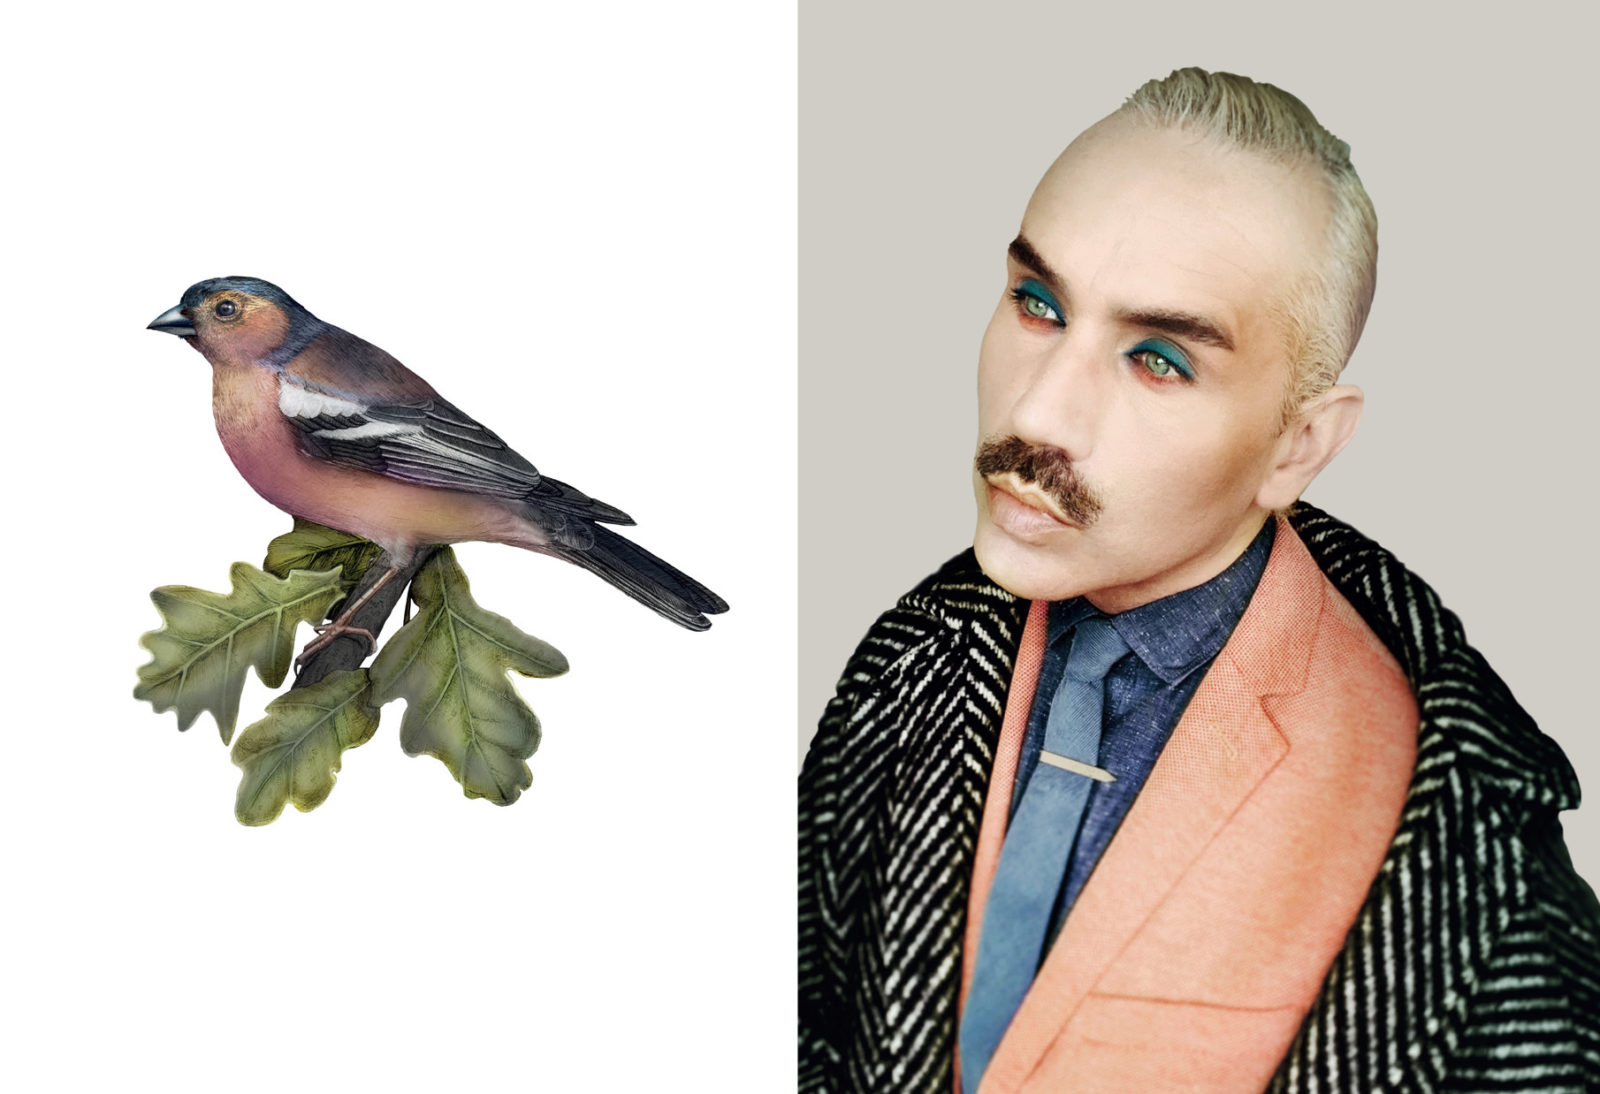 Paul Harfleet is photographed dressed up as a chaffinch, he is wearing a charcoal blue shirt and tie, a peach blazer and a black and white wool coat. His eye shadow is turquoise on top and he has orange eye liner underneath his eyes. His hair is grey and slicked back. Next to him is a detailed illustration of a chaffinch bird.